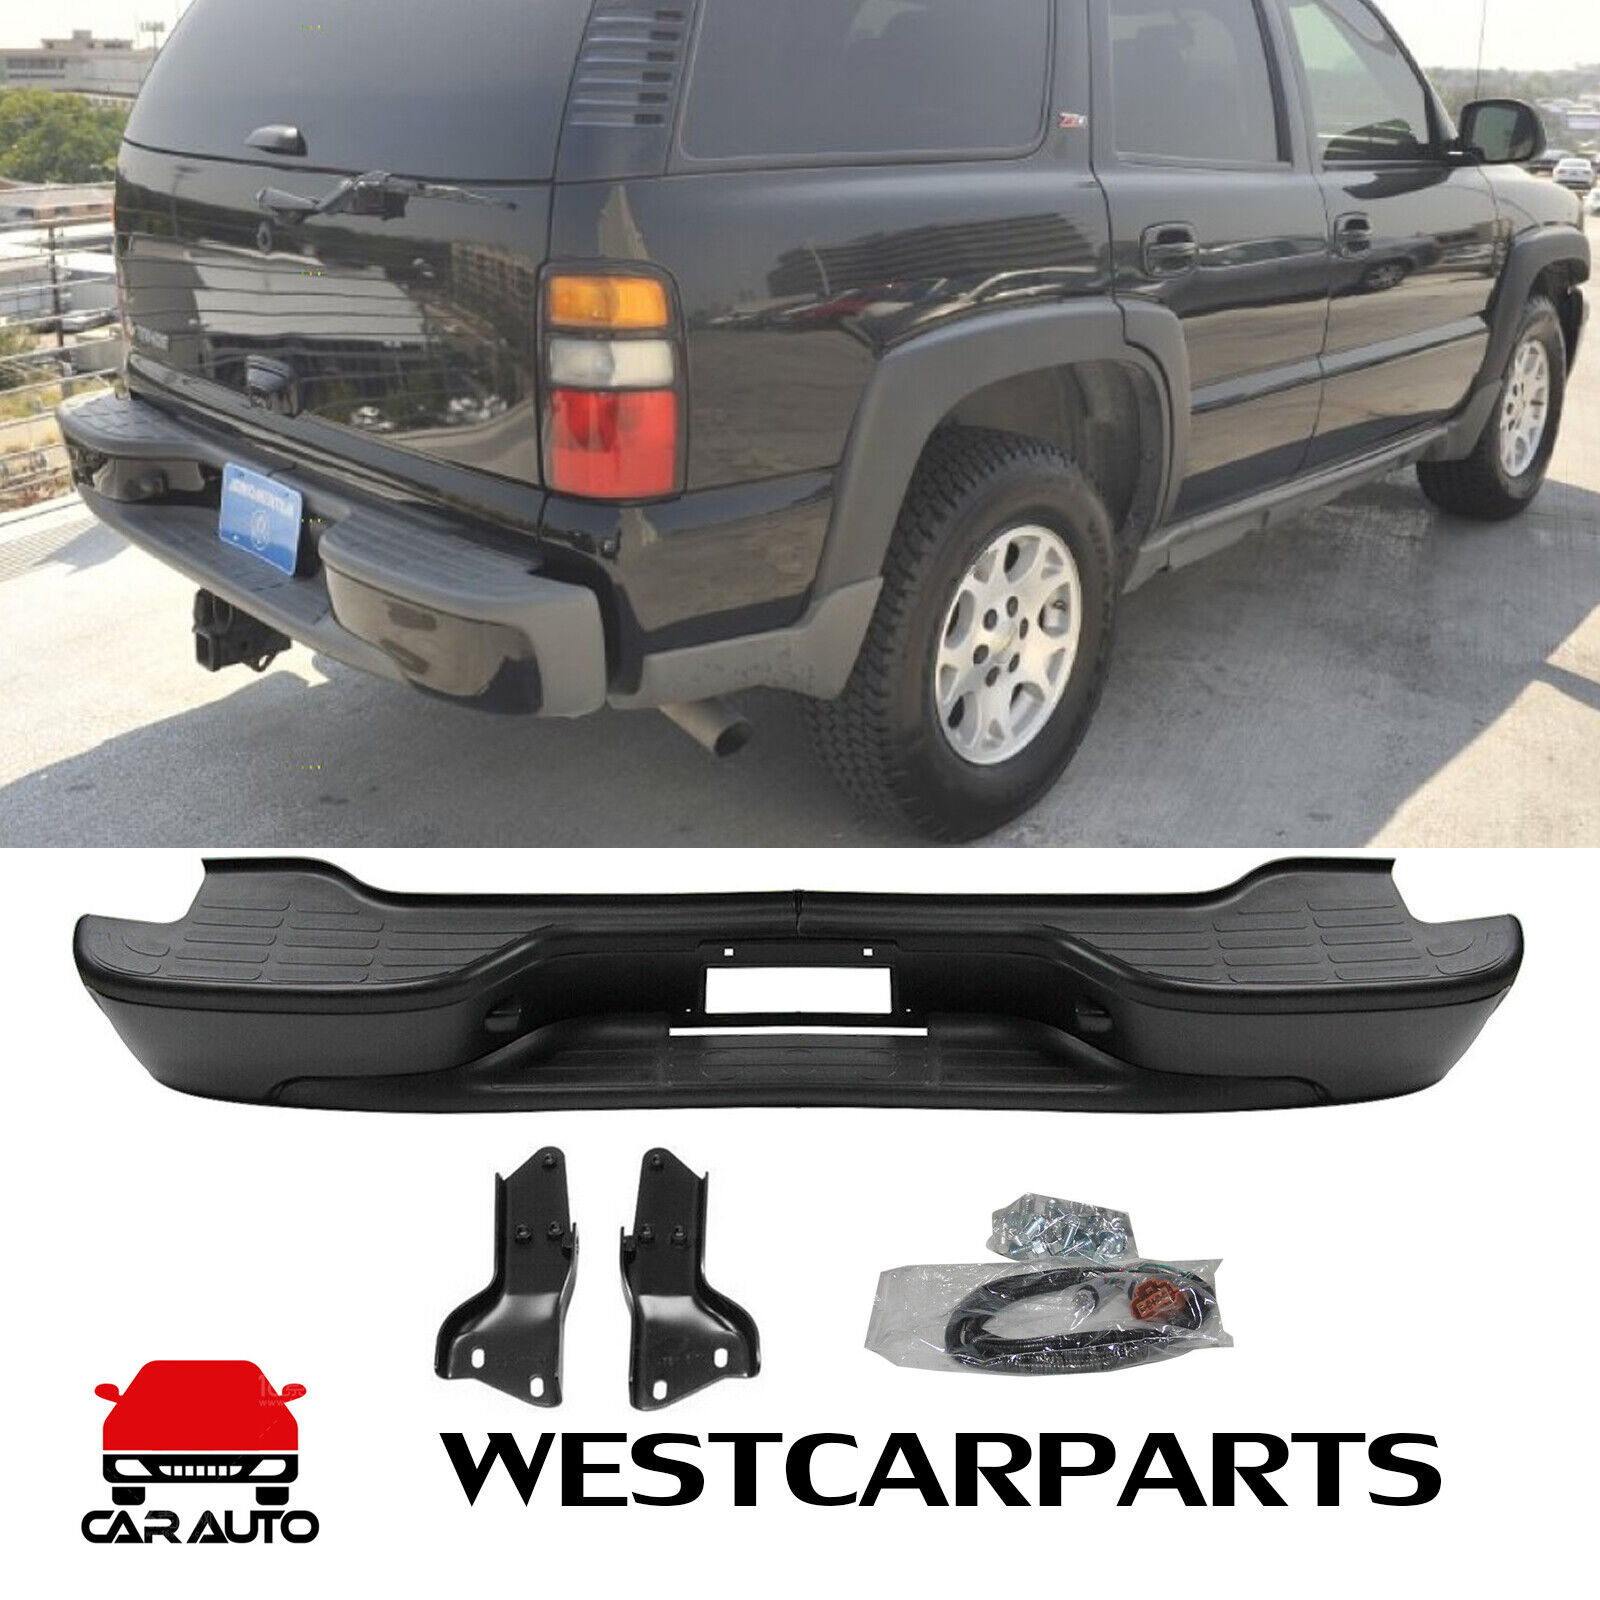 Complete Black Rear Bumper Assembly For 00-06 Chevy Tahoe Suburban GMC Yukon XL